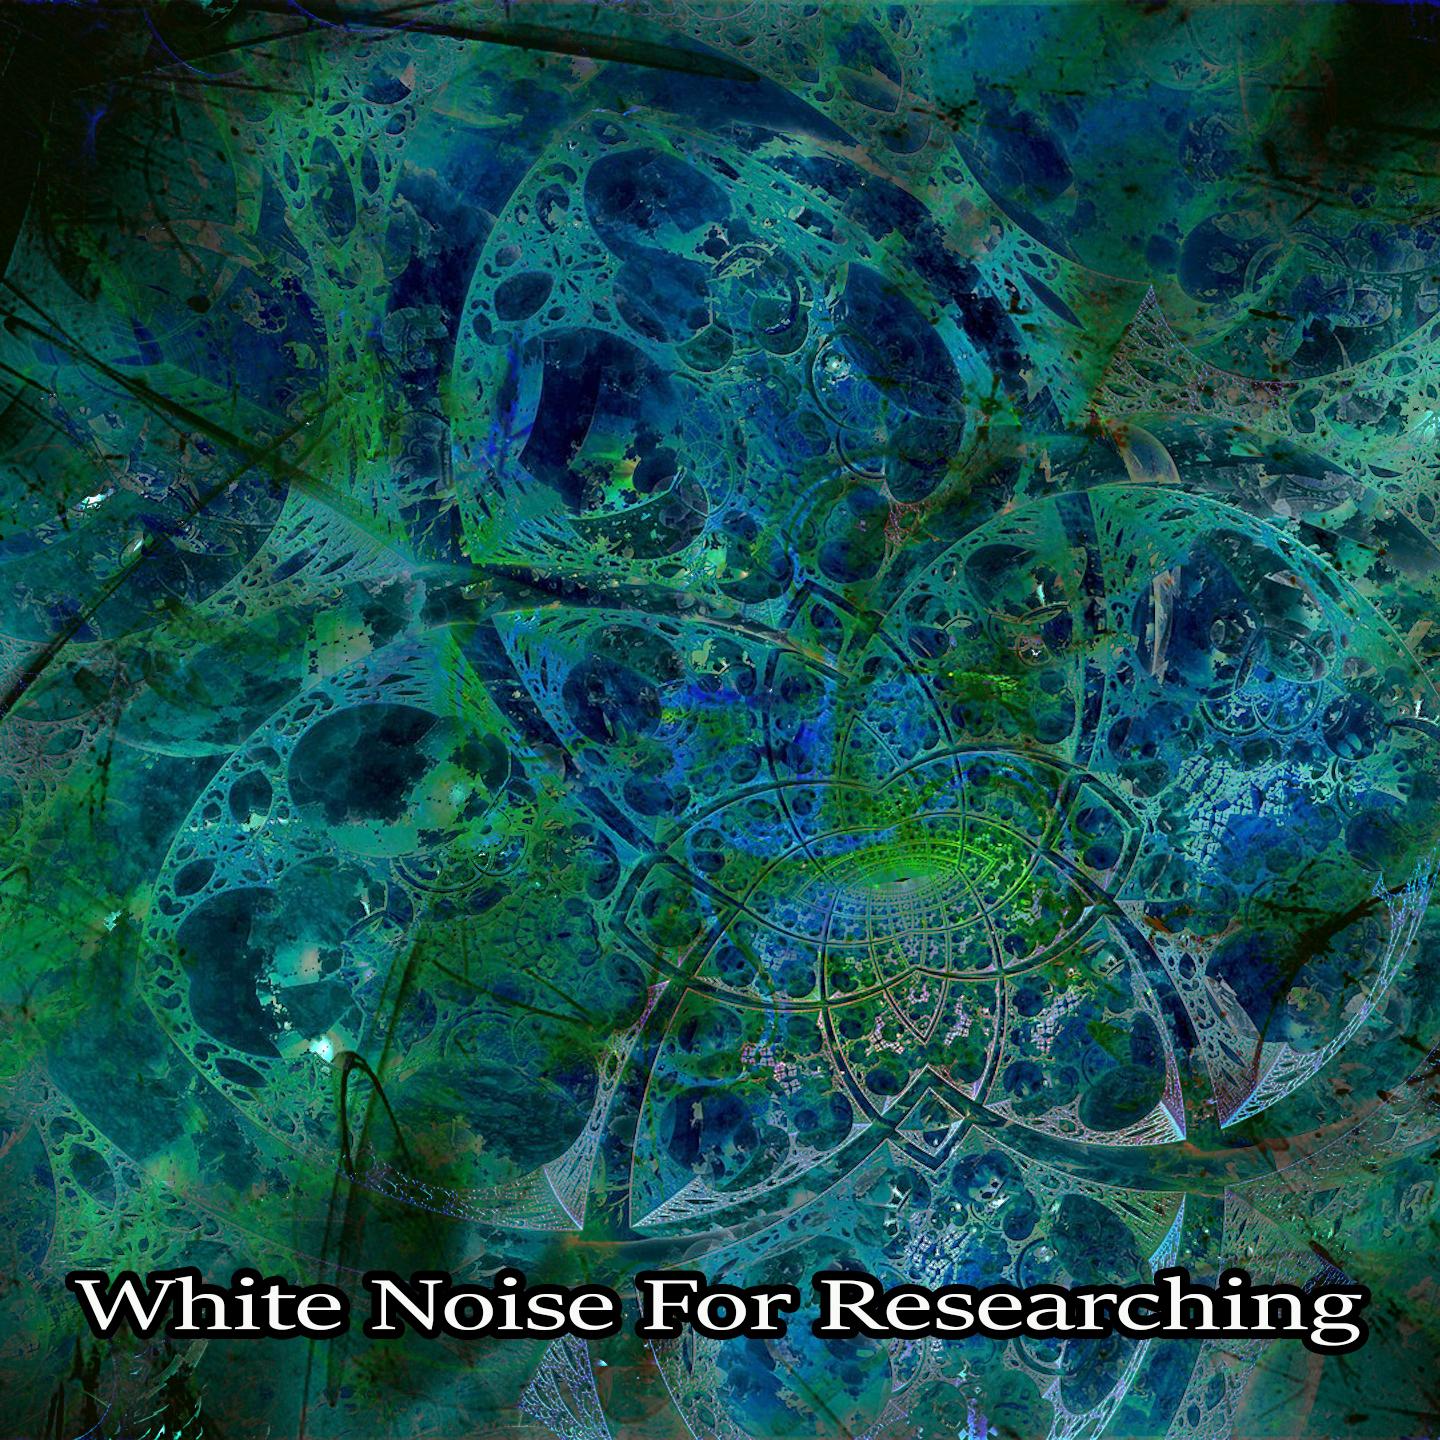 White Noise For Researching